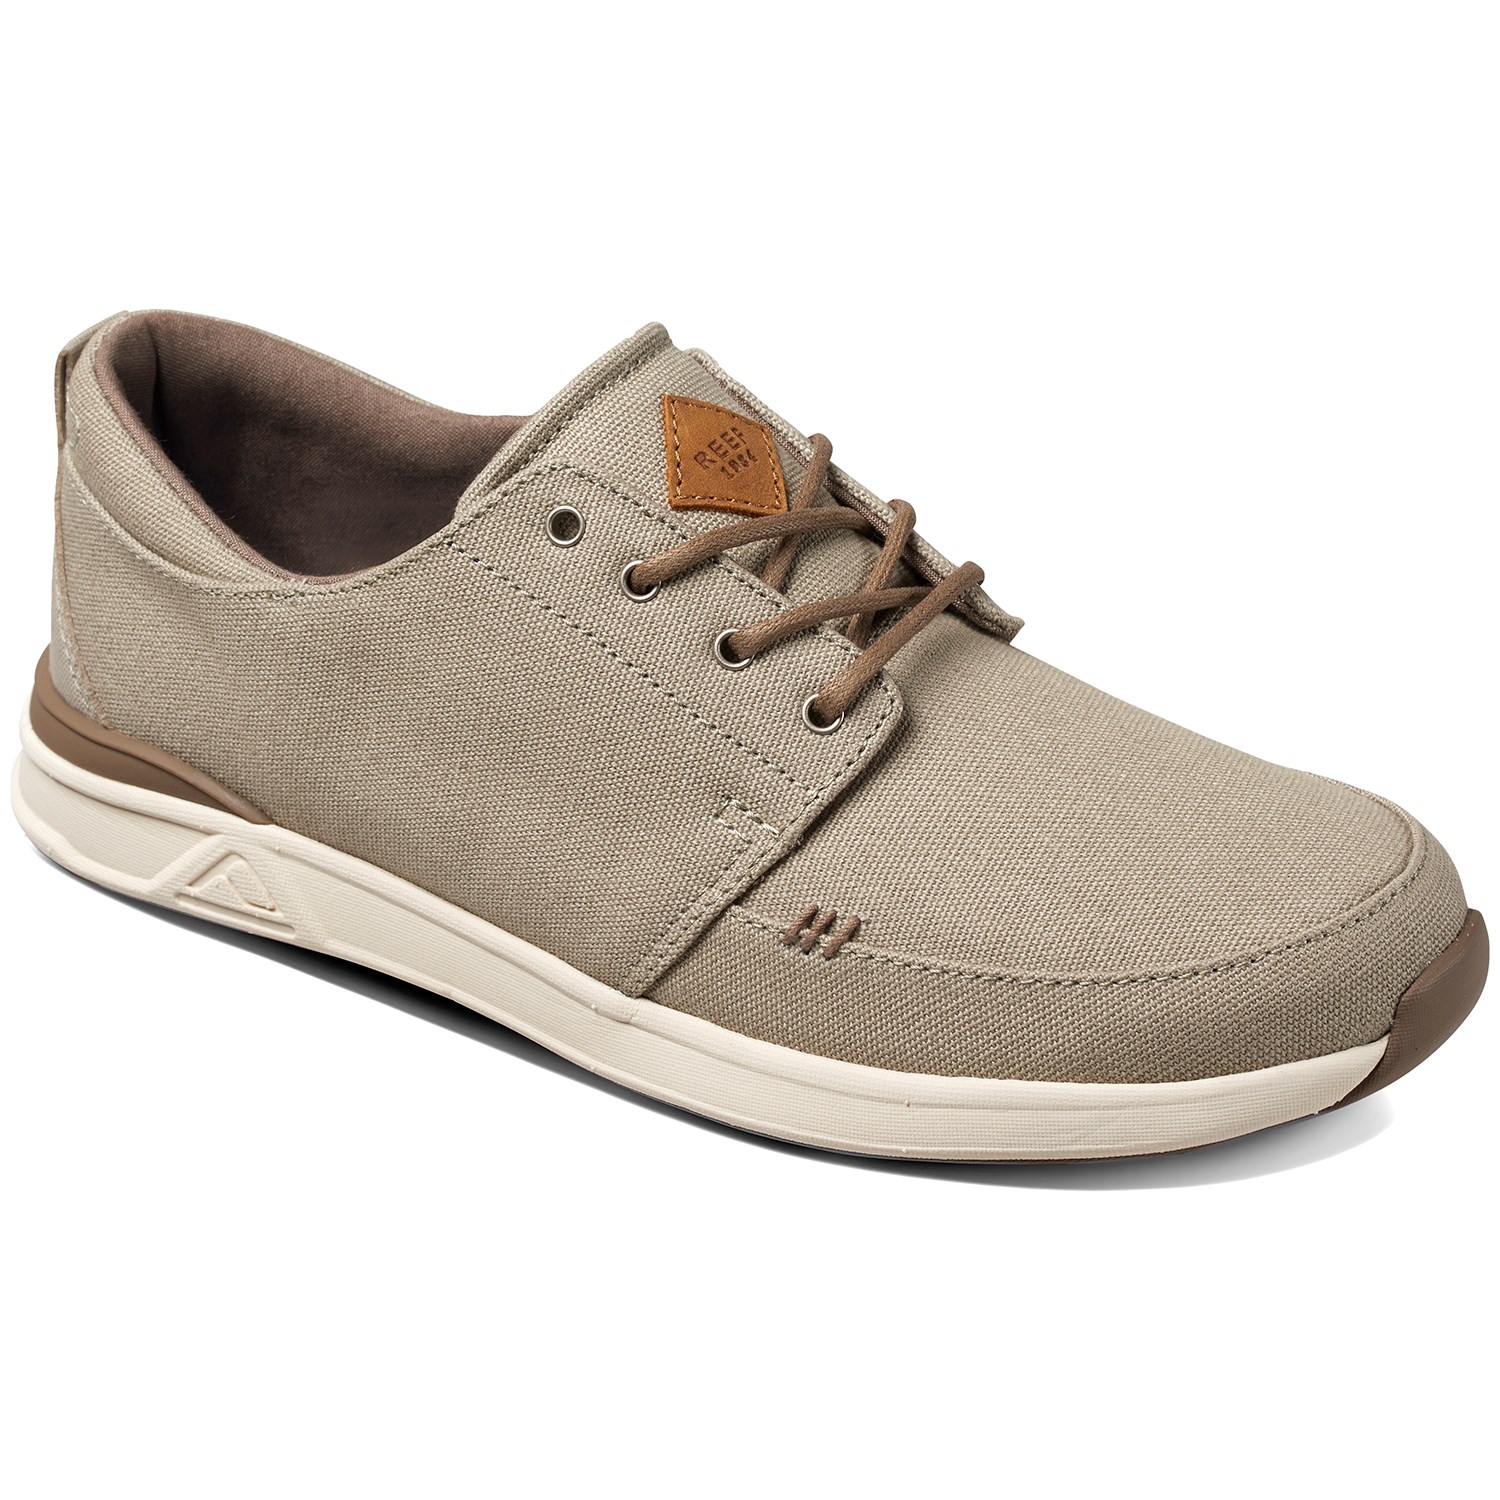 reef shoes reef rover low shoes | evo zbyhboz